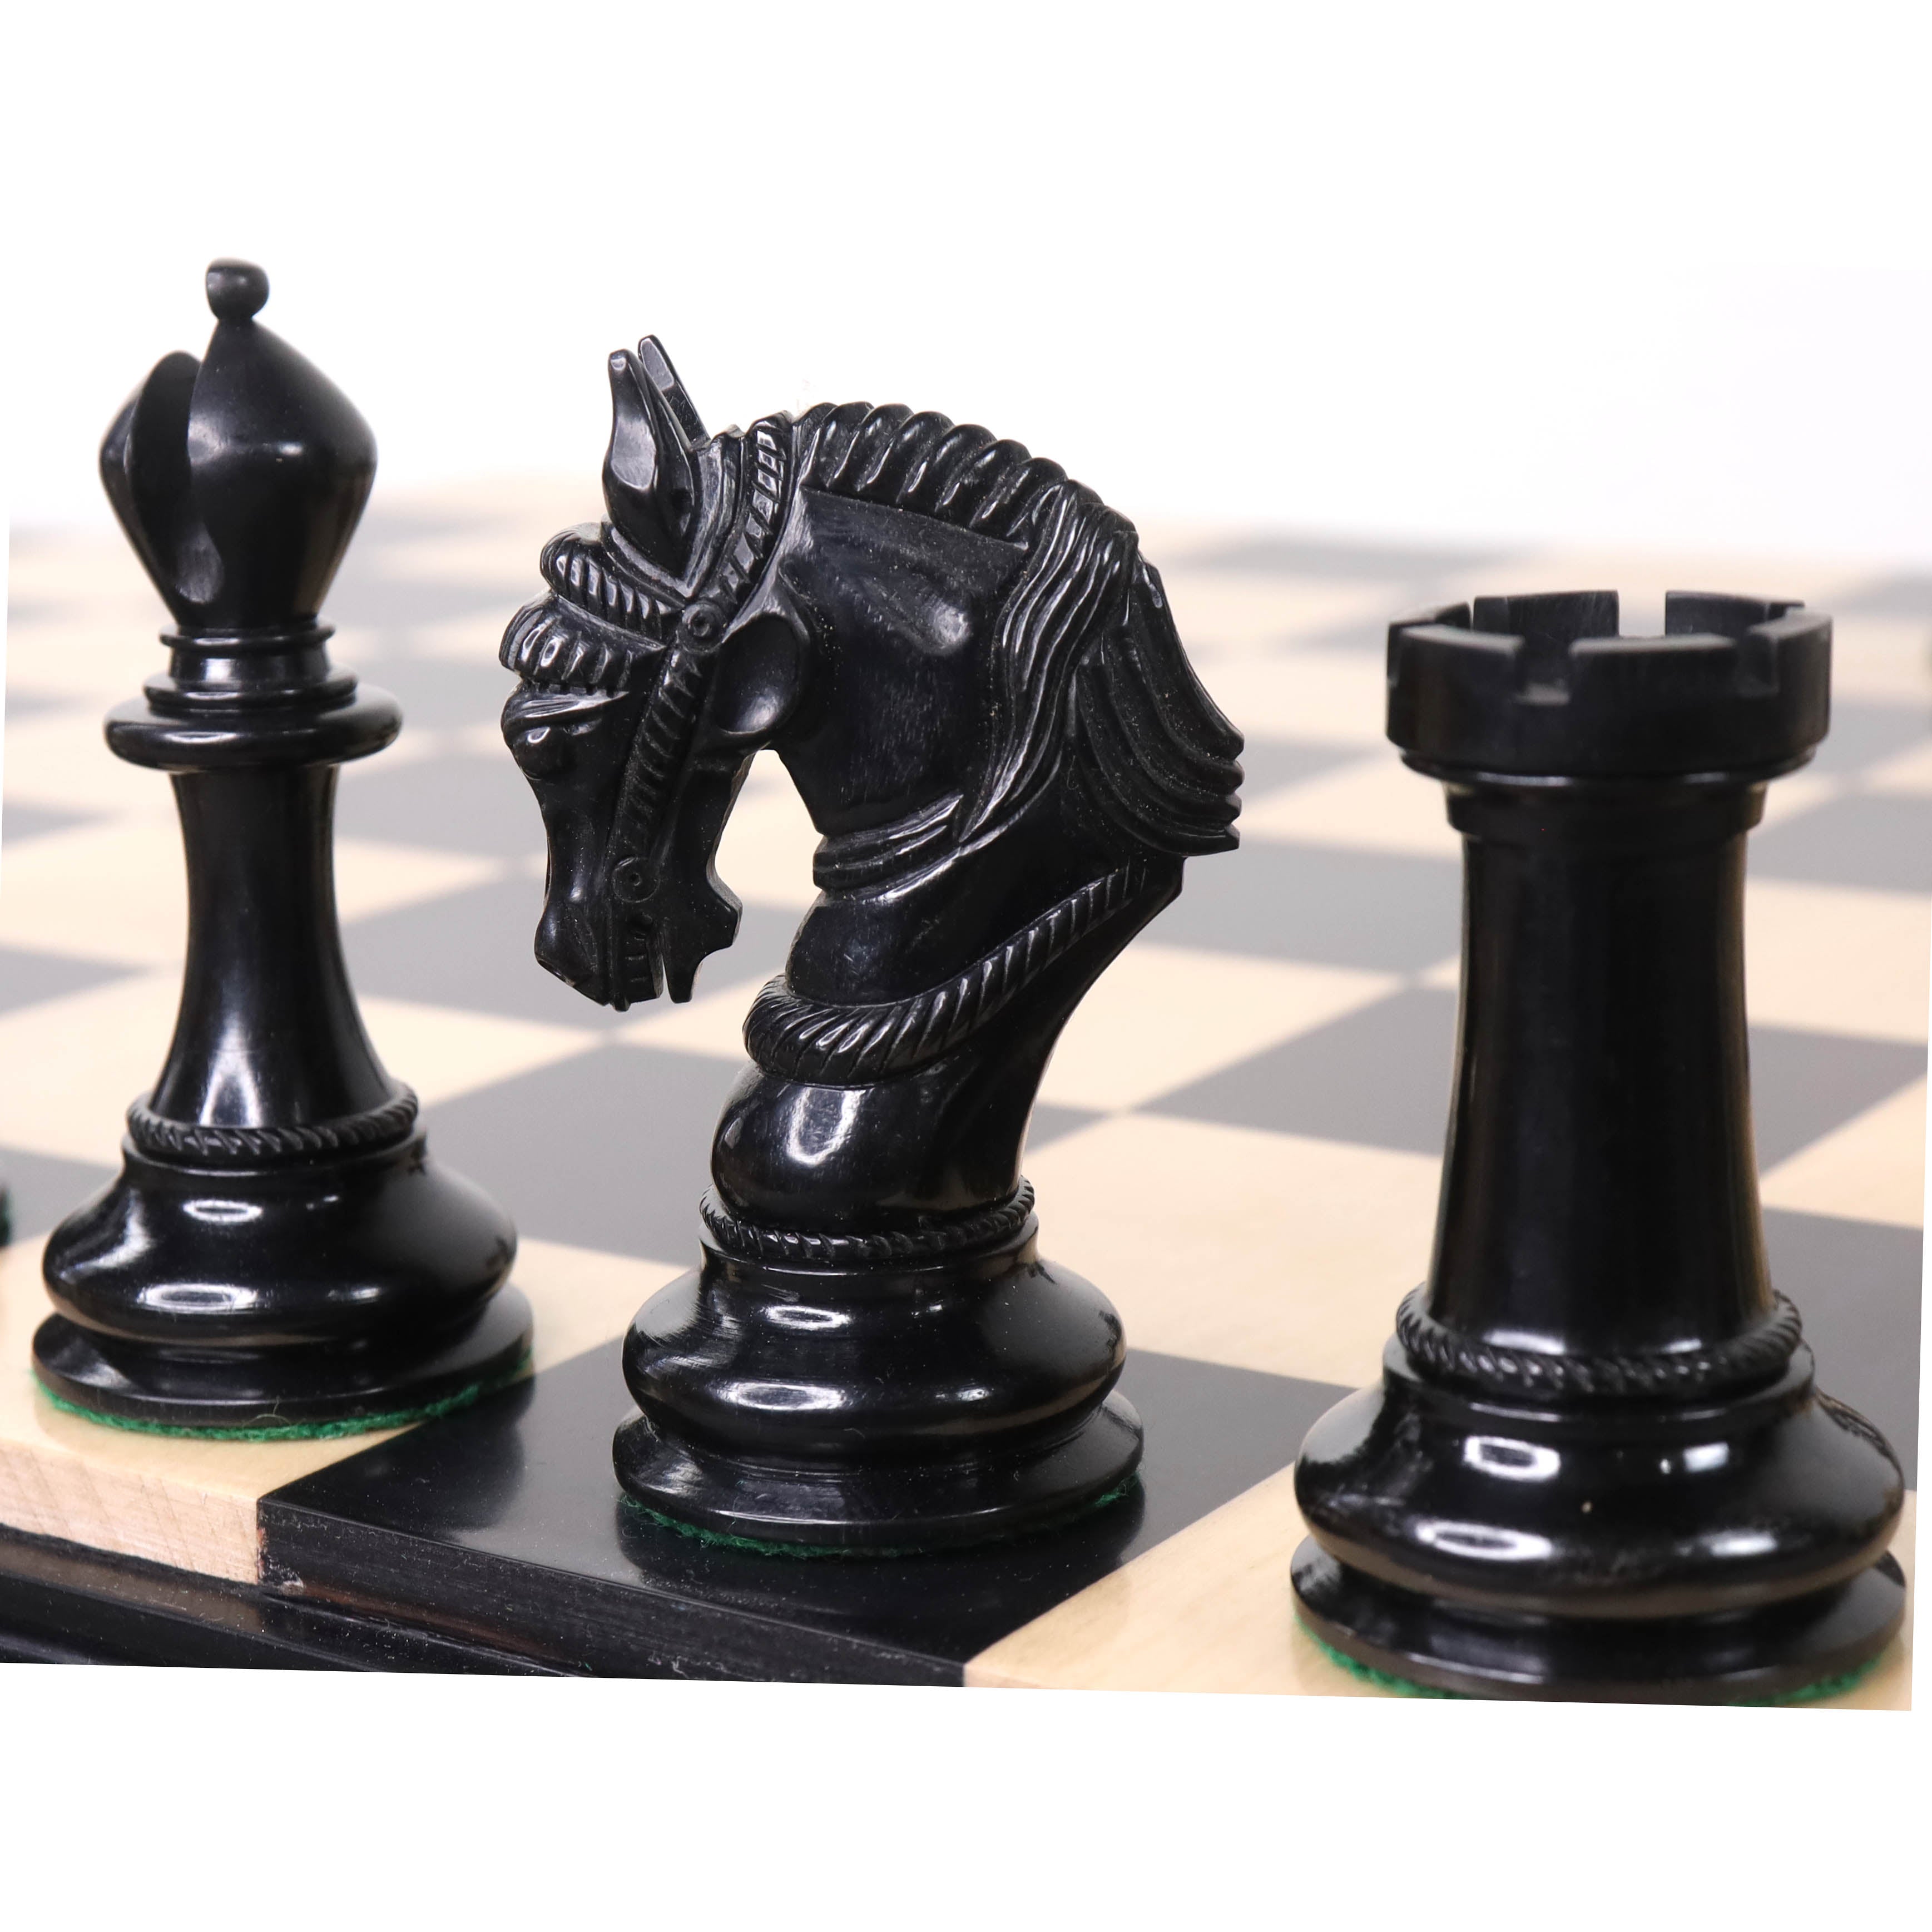 4.5" Imperator Luxury Chess Set Combo - Pieces in Ebony Wood with 23" Chess board